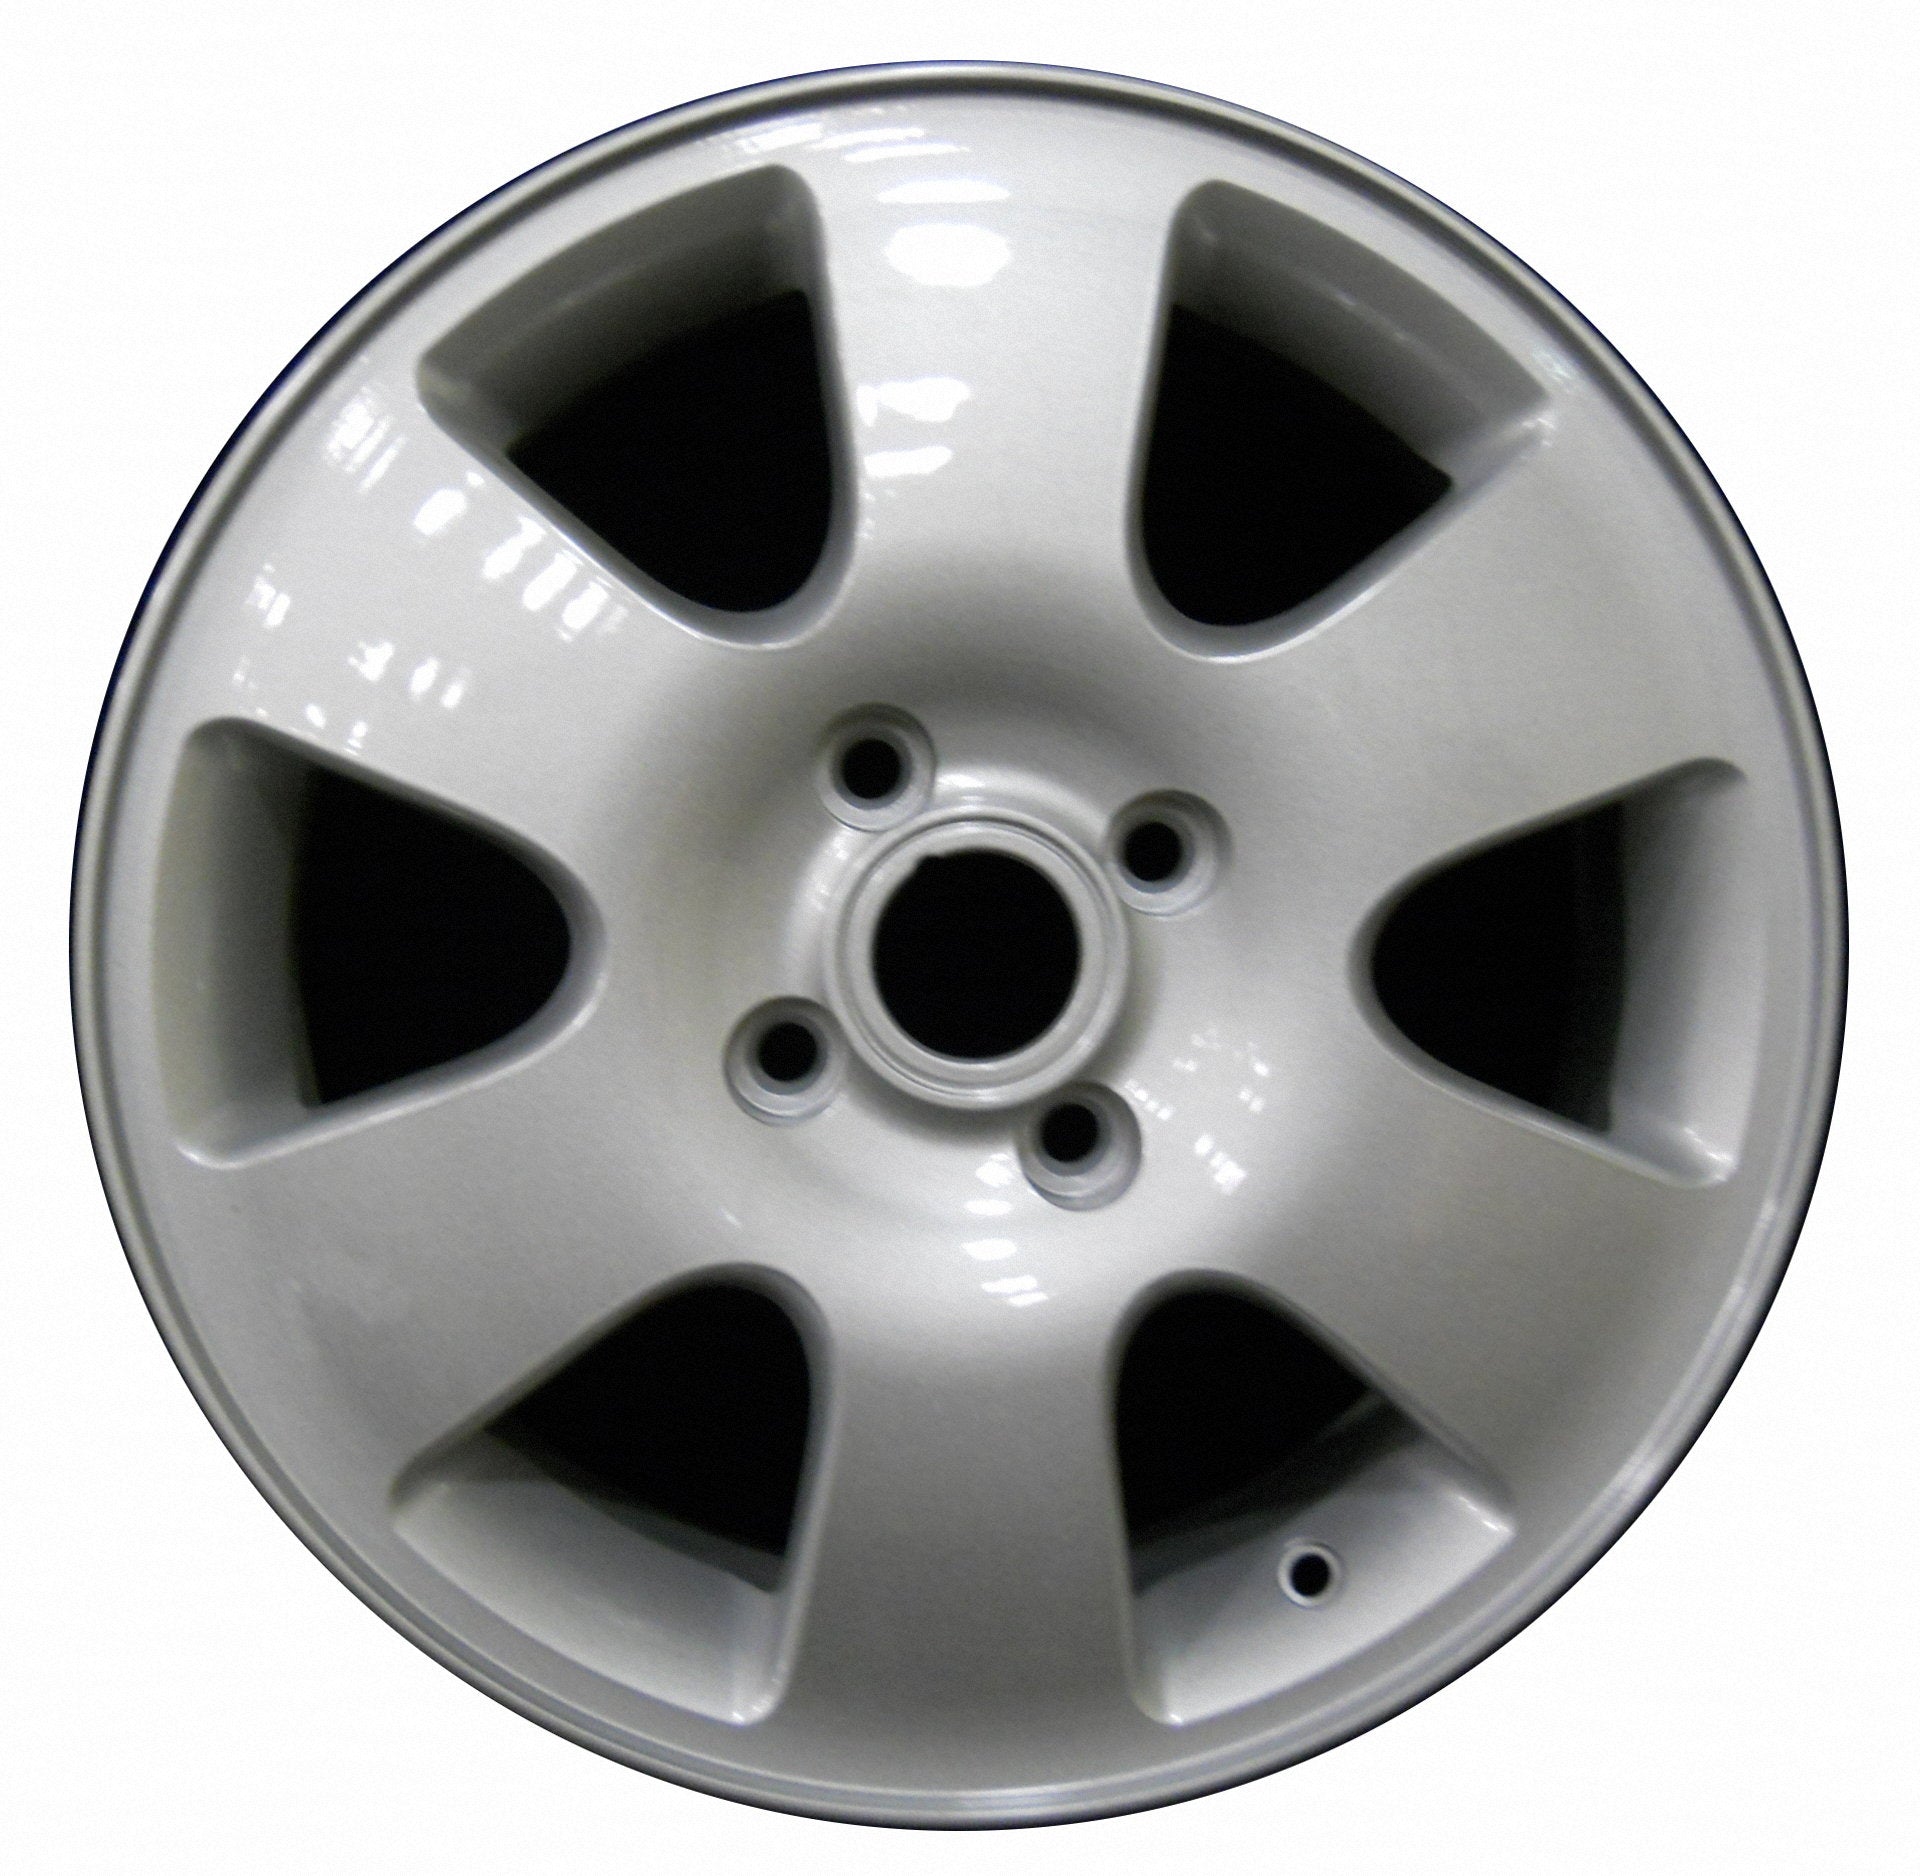 Ford Focus  2000, 2001, 2002, 2003 Factory OEM Car Wheel Size 16x6 Alloy WAO.3438.PS02.FF